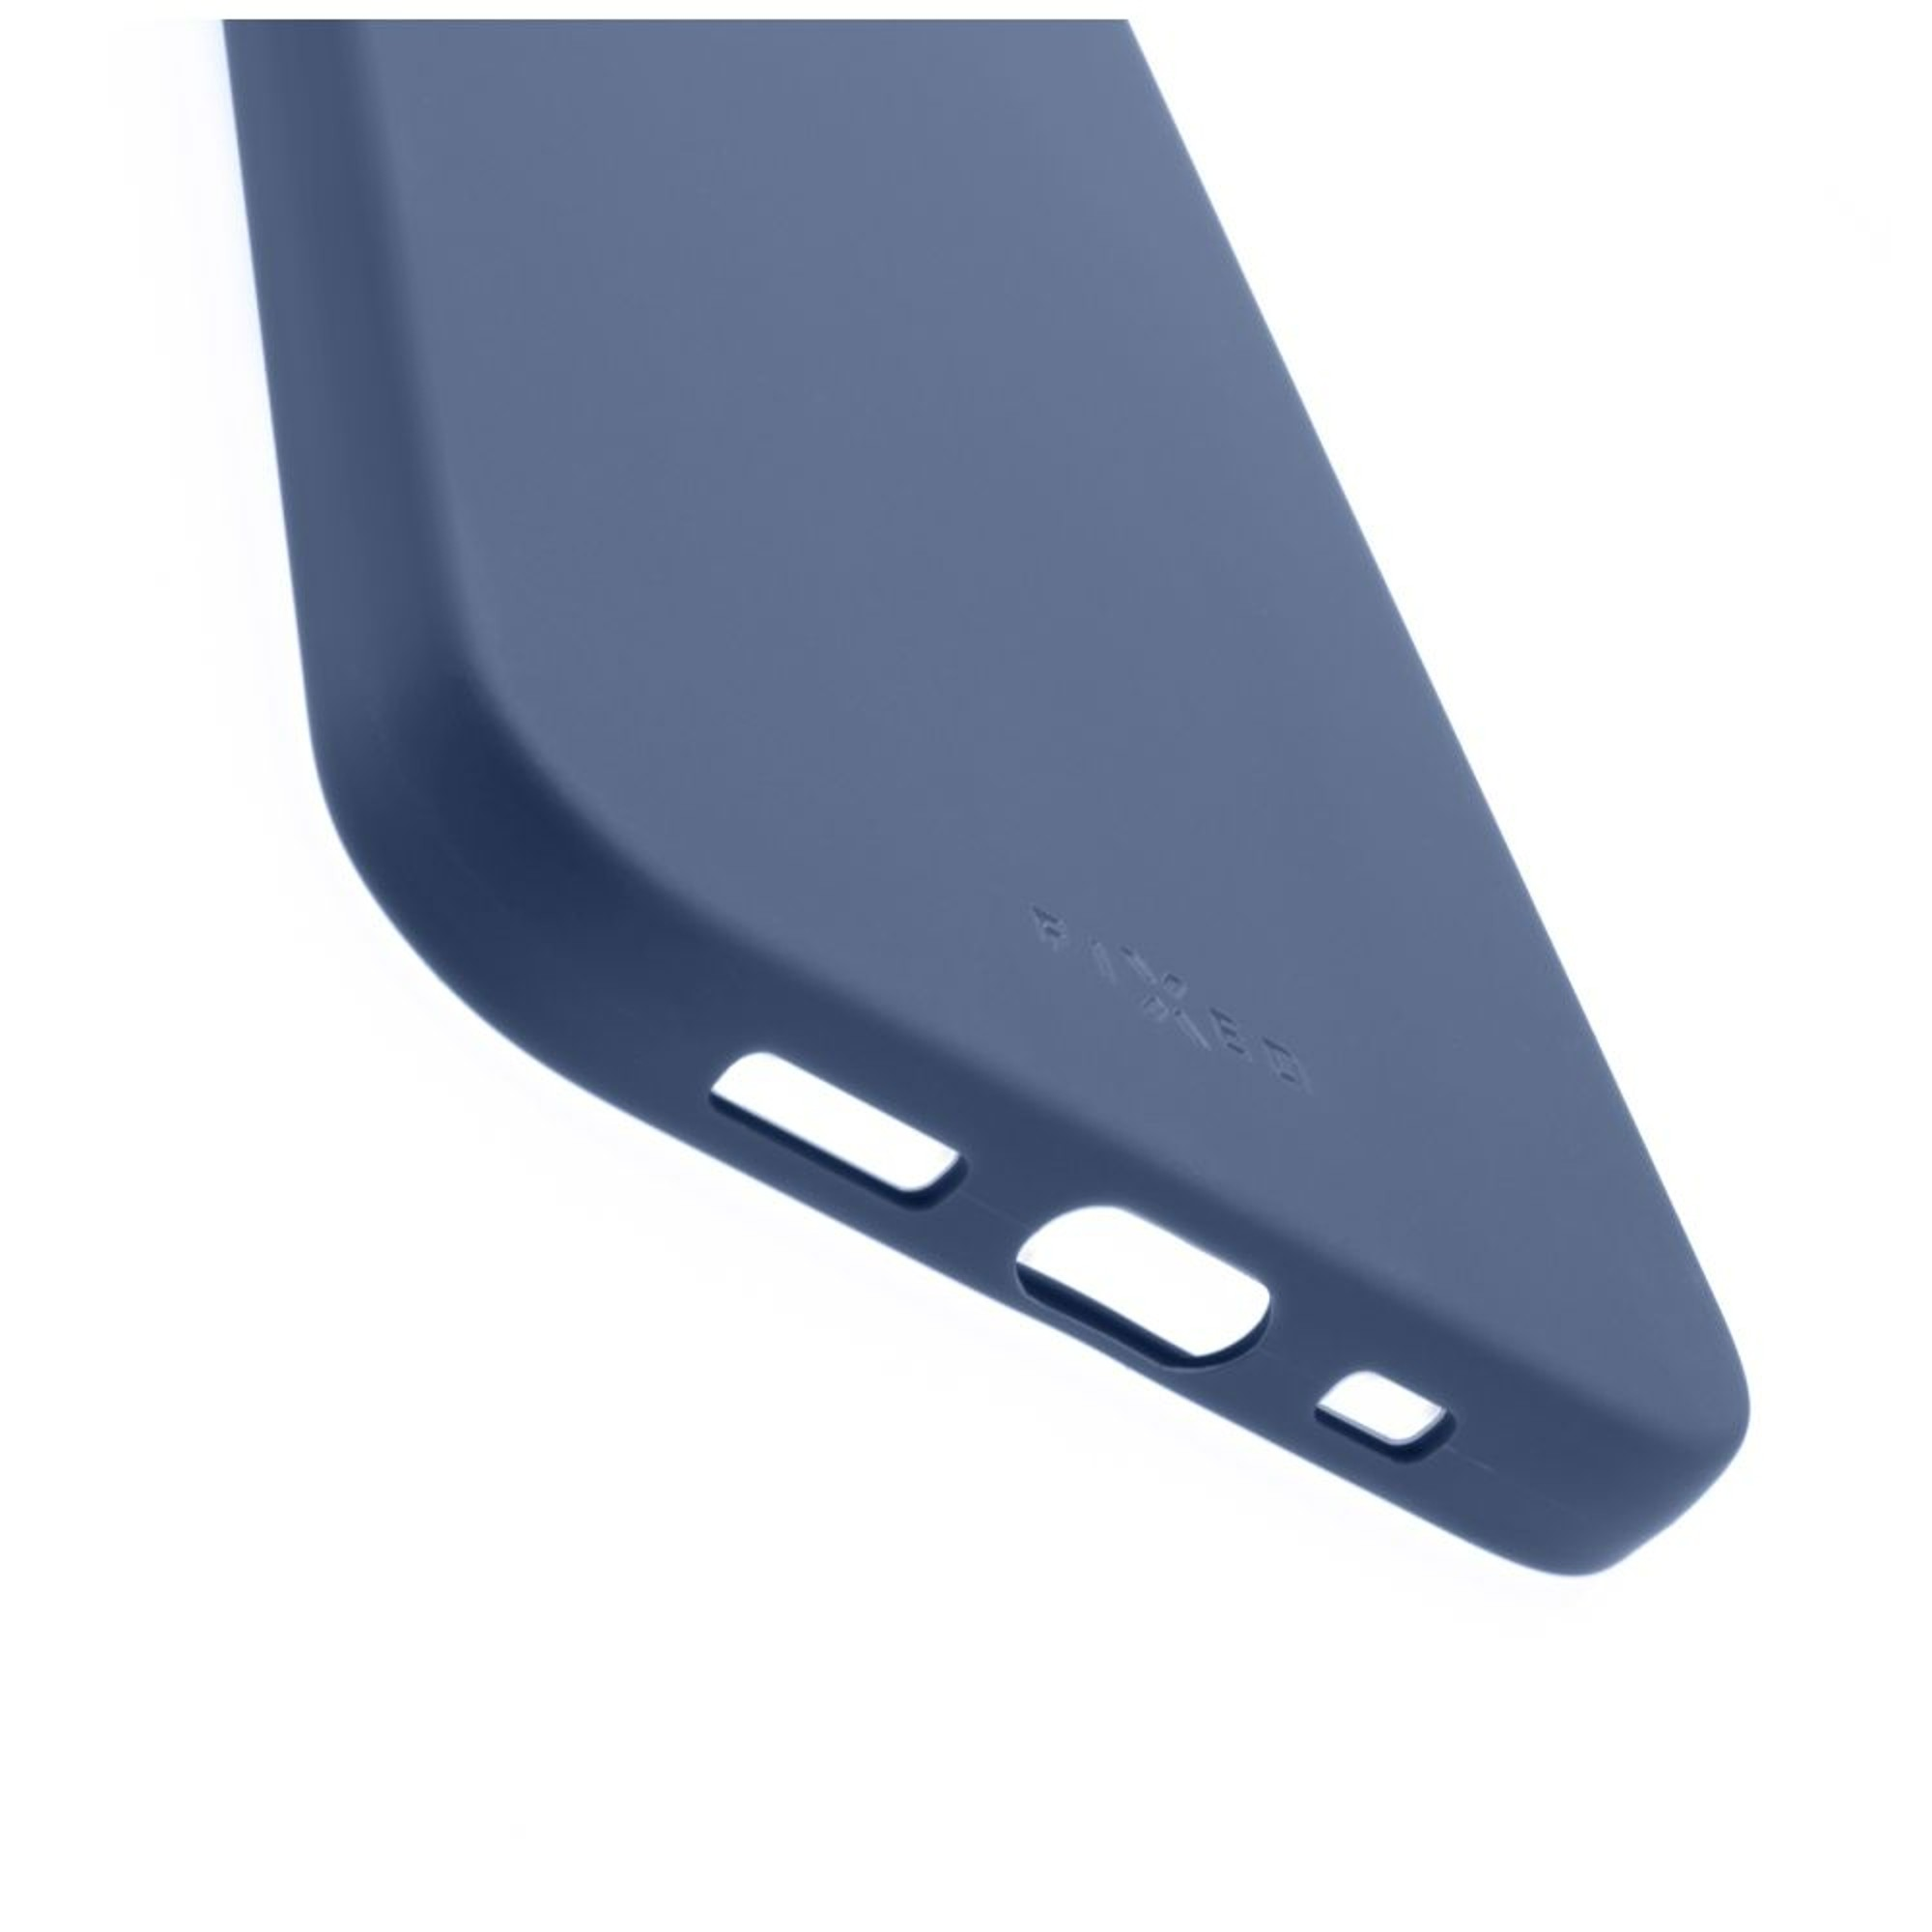 Pro Blau iPhone FIXED Apple, Backcover, 15 FIXST-1203-BL, Max,